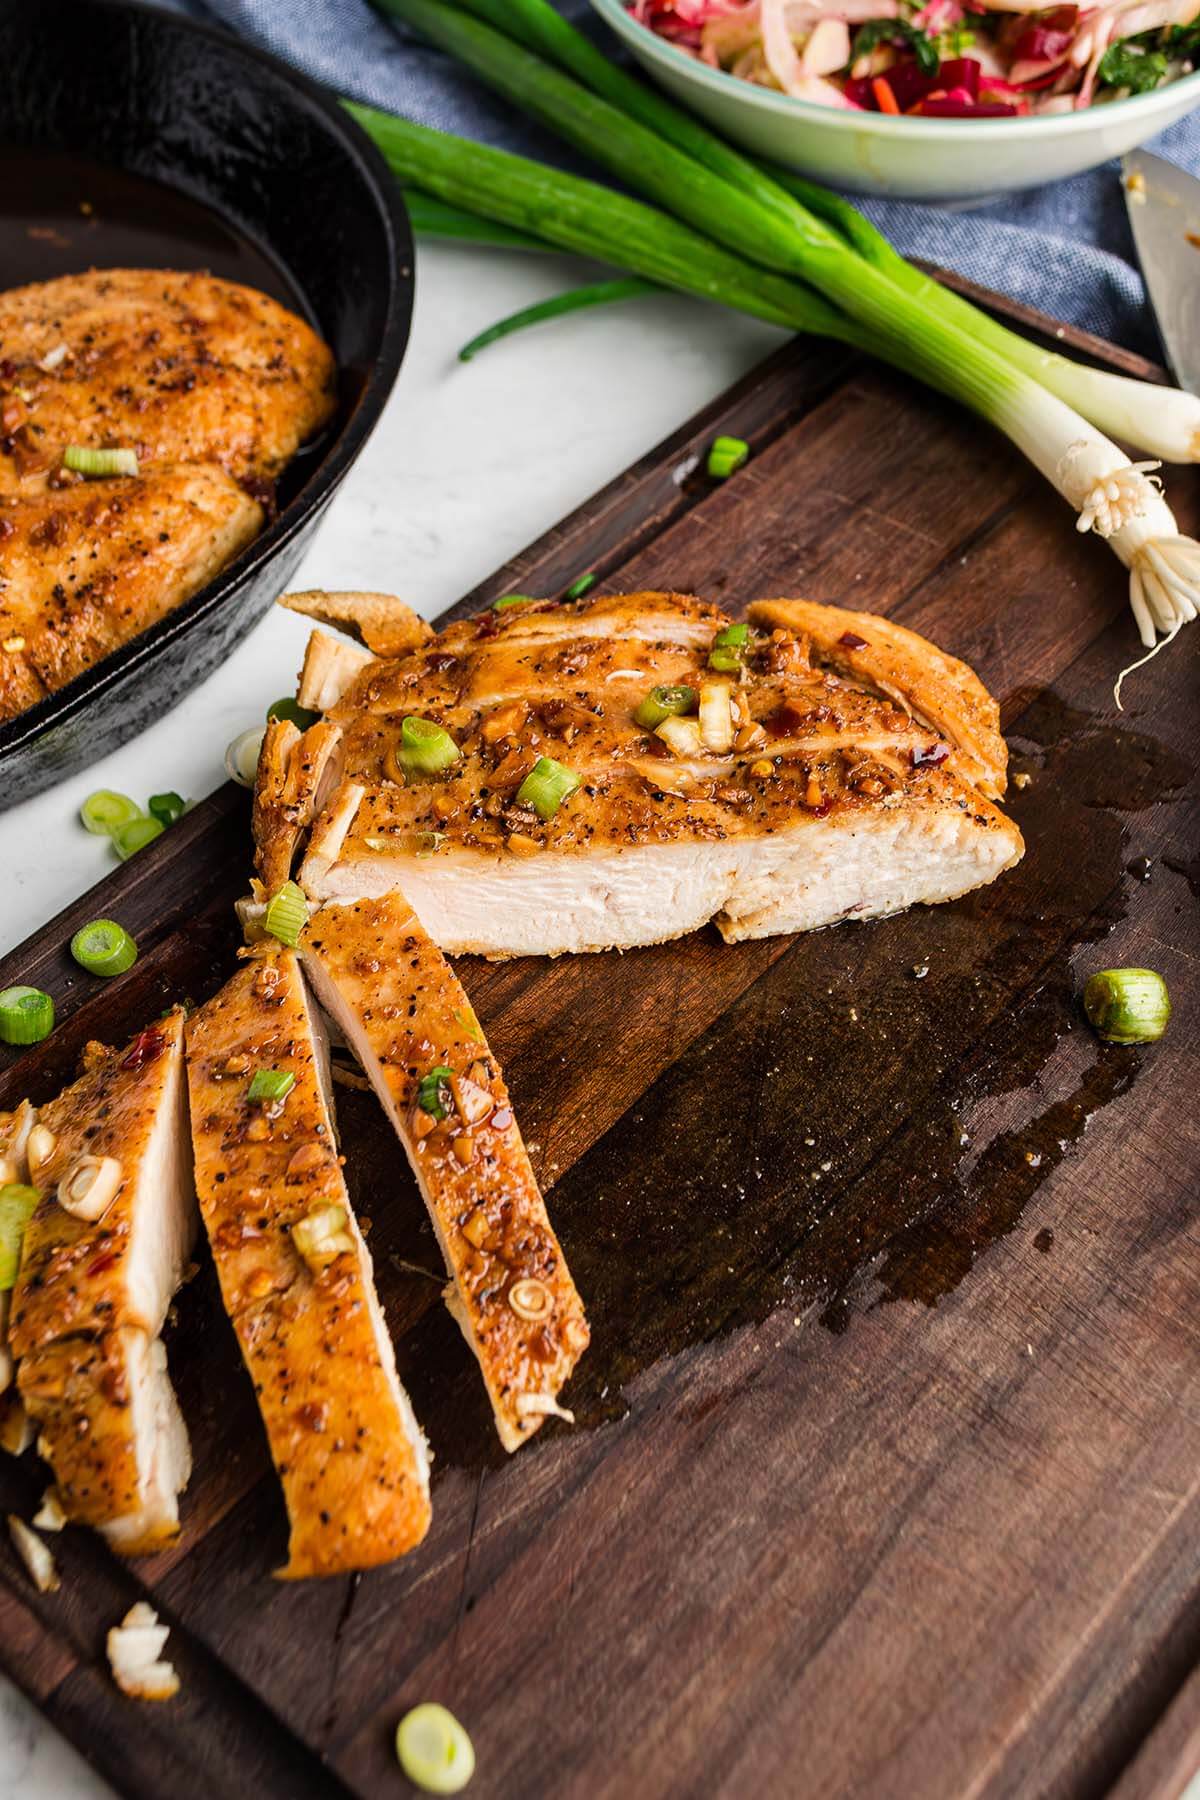 Slices of soy garlic chicken on a board.